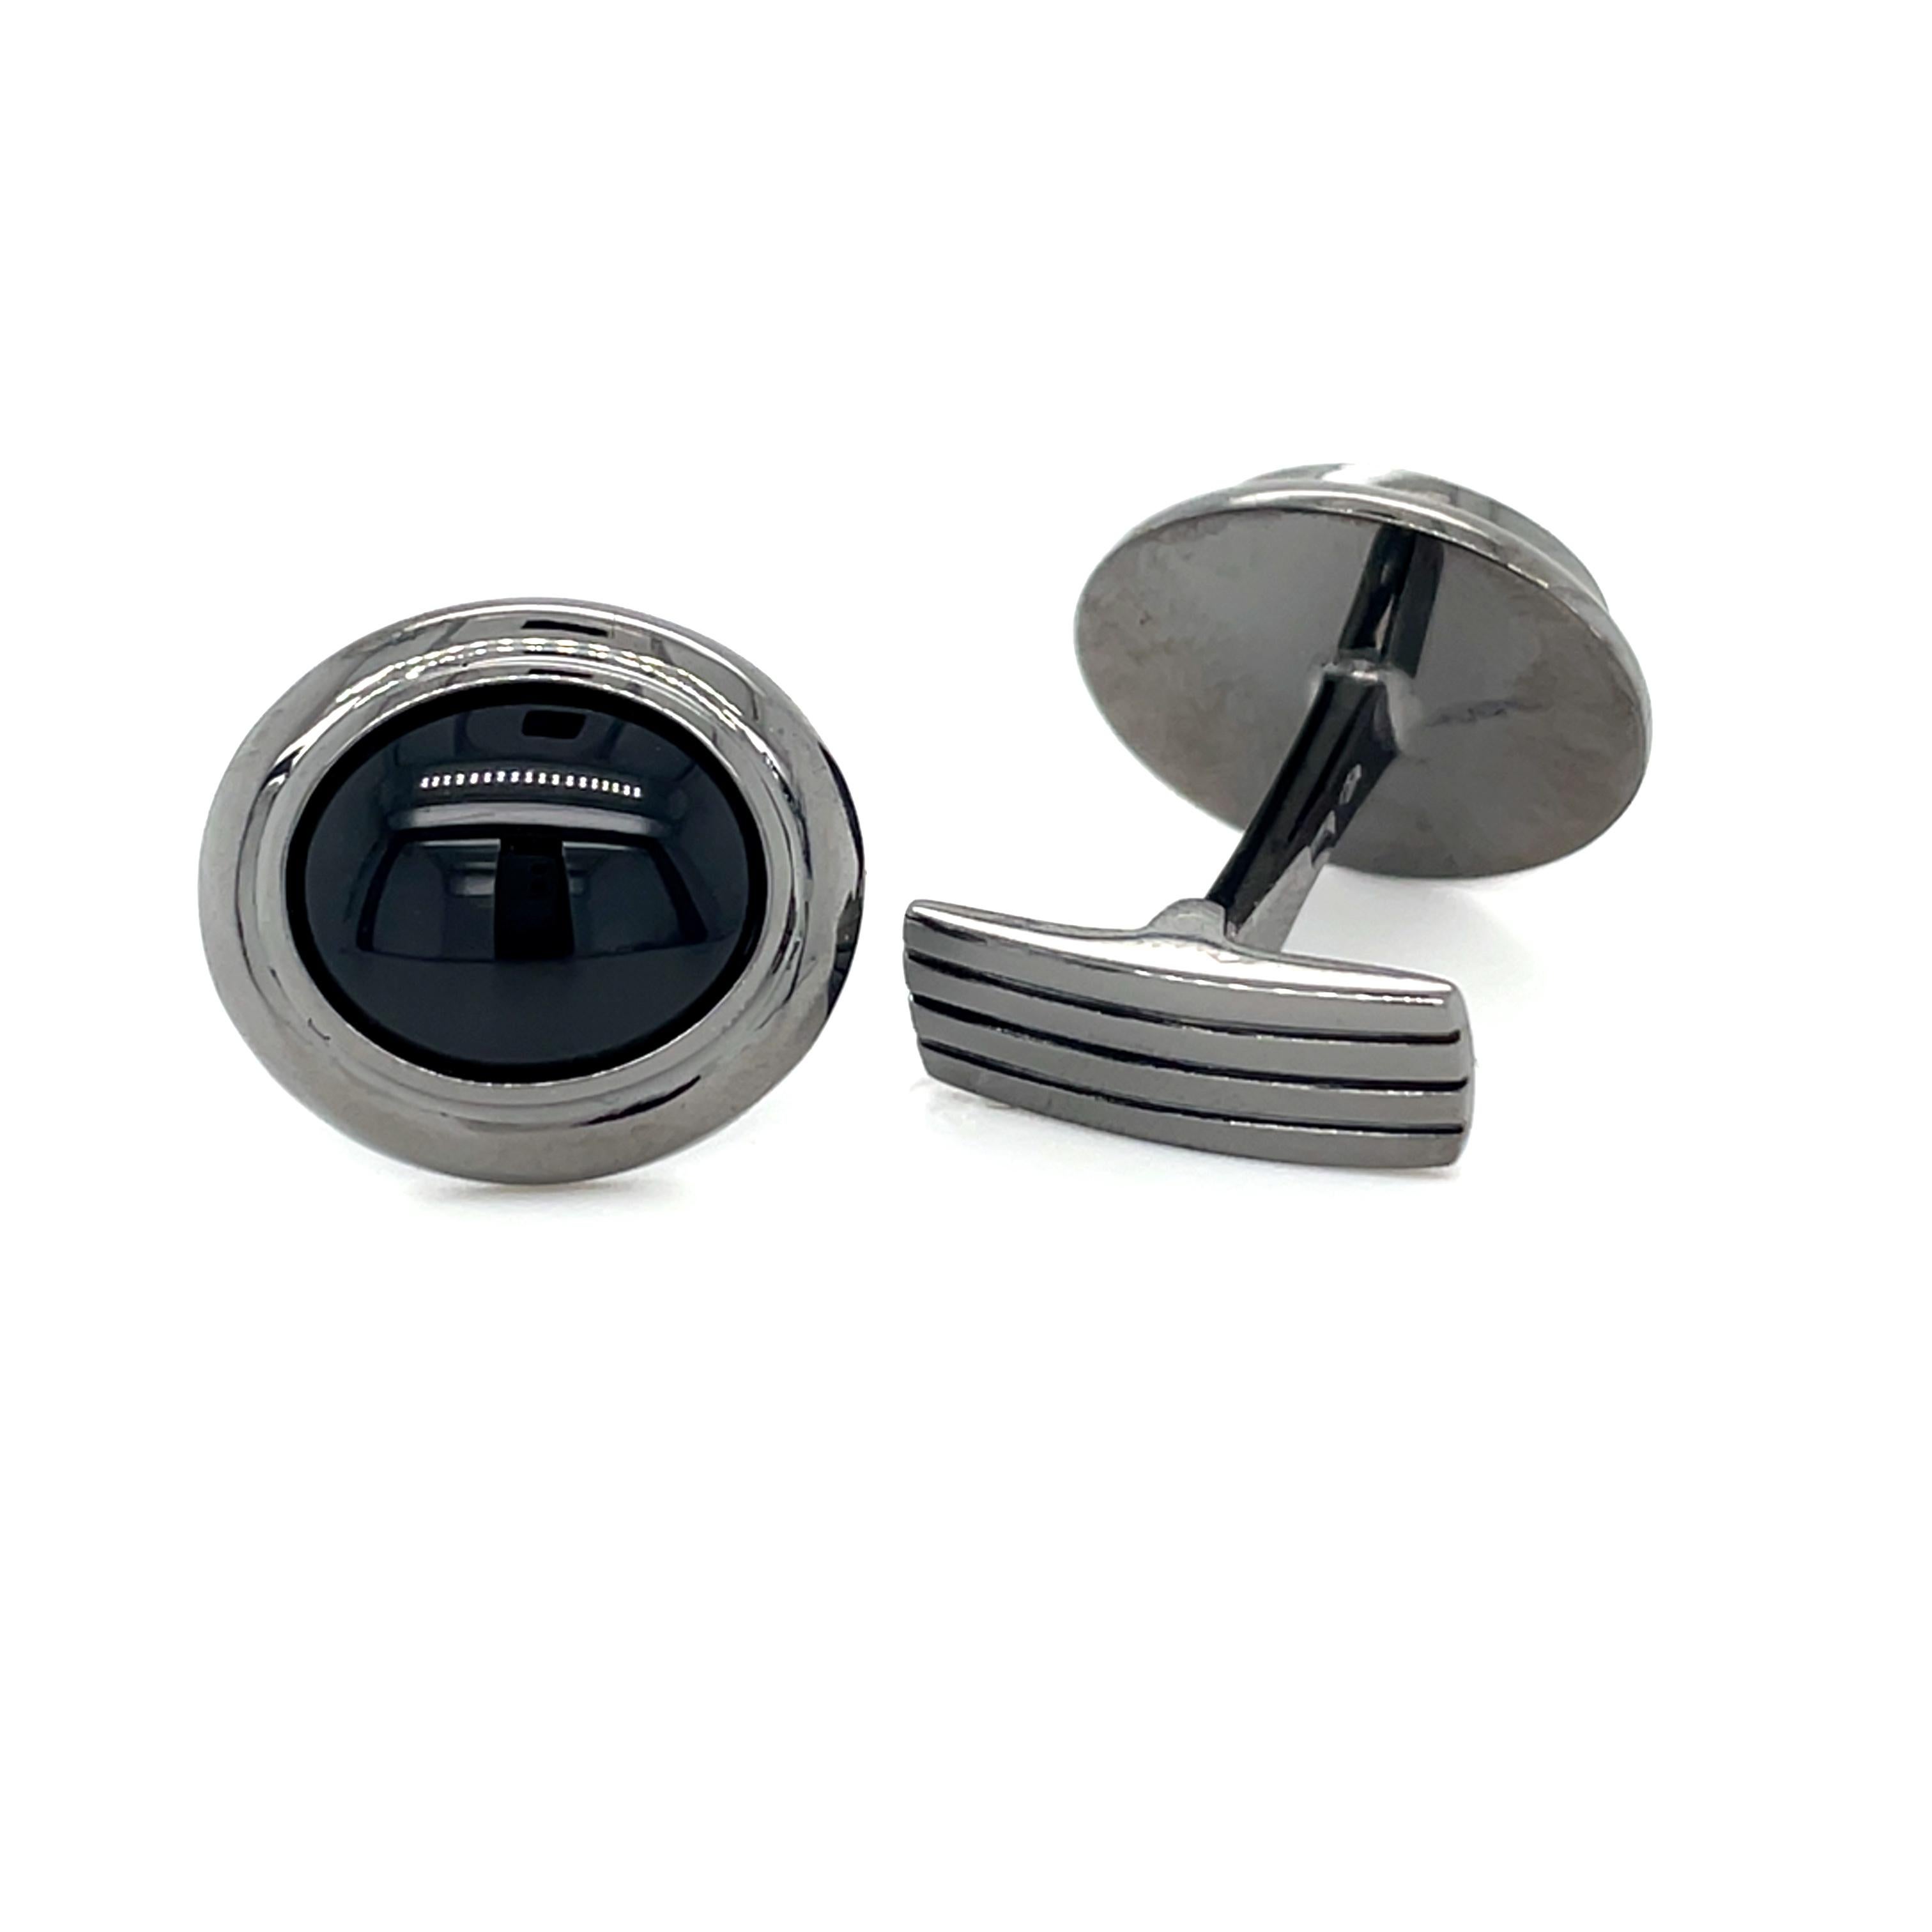 These white gold (black rhodium) cufflinks are from Men's Collection. These cufflinks are decorated with onyx. The total amount of it is 8 Carat. The dimensions of the cufflinks are 1.7cm x 1.5cm. These cufflinks are a perfect upgrade to every